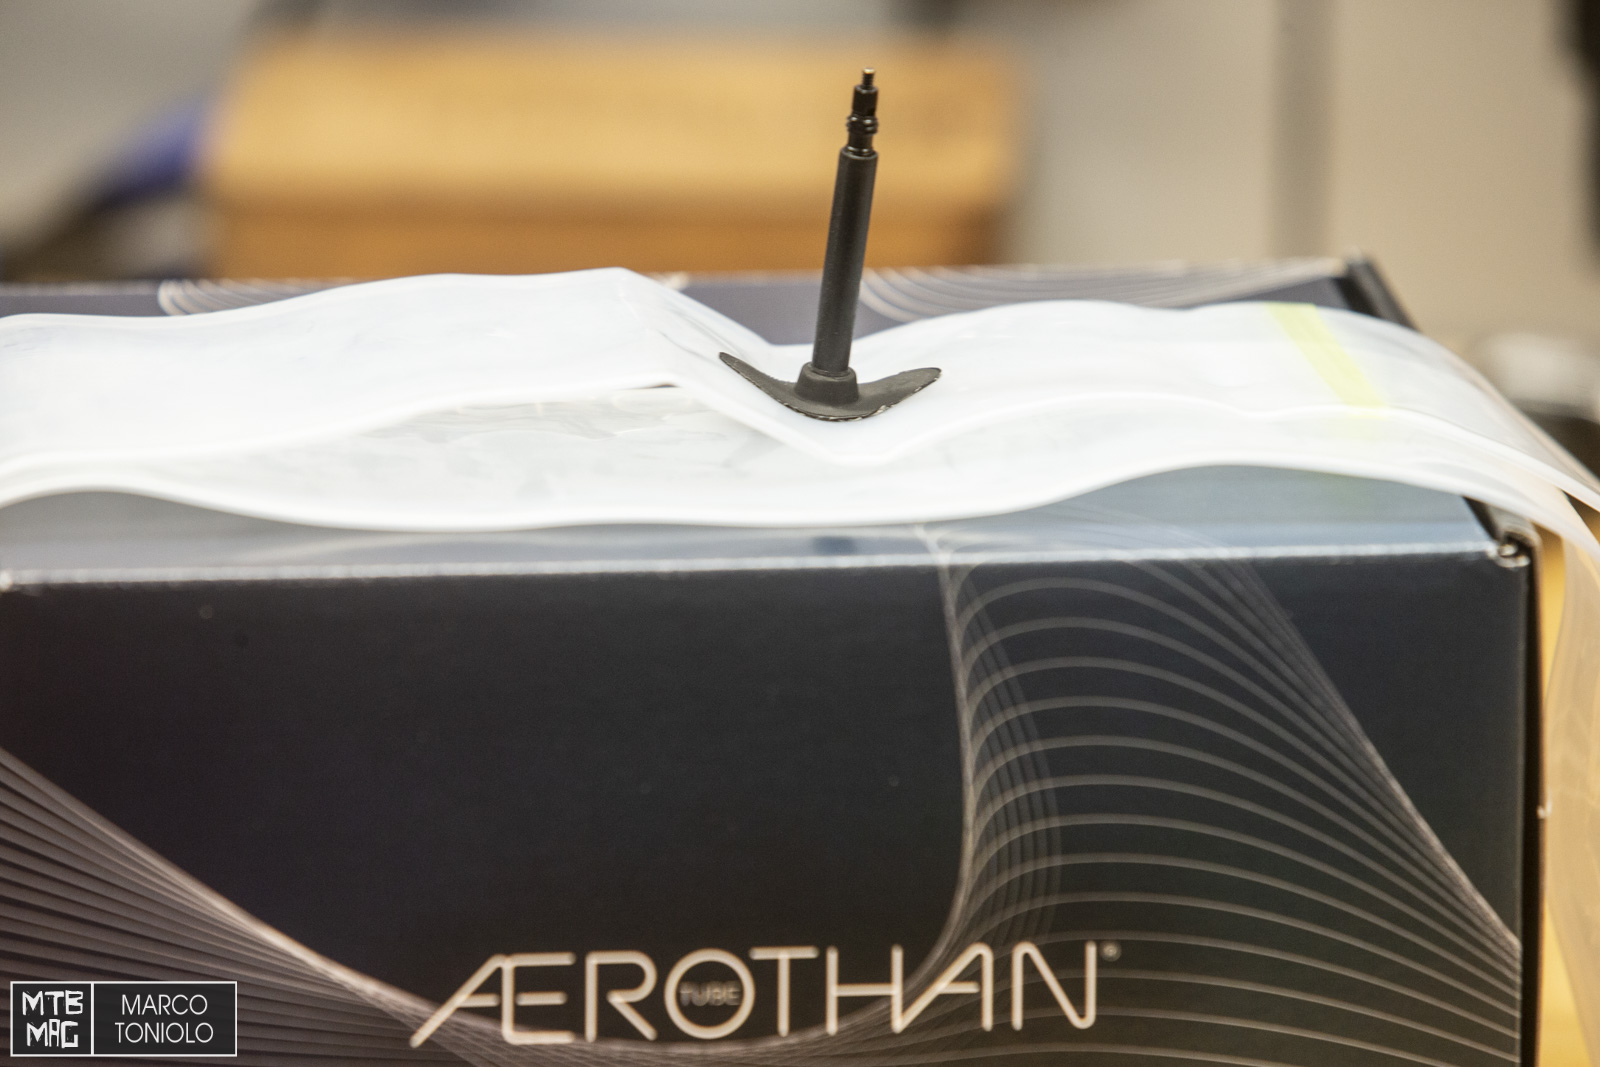 Schwalbe lancia le nuove camere d'aria Aerothan